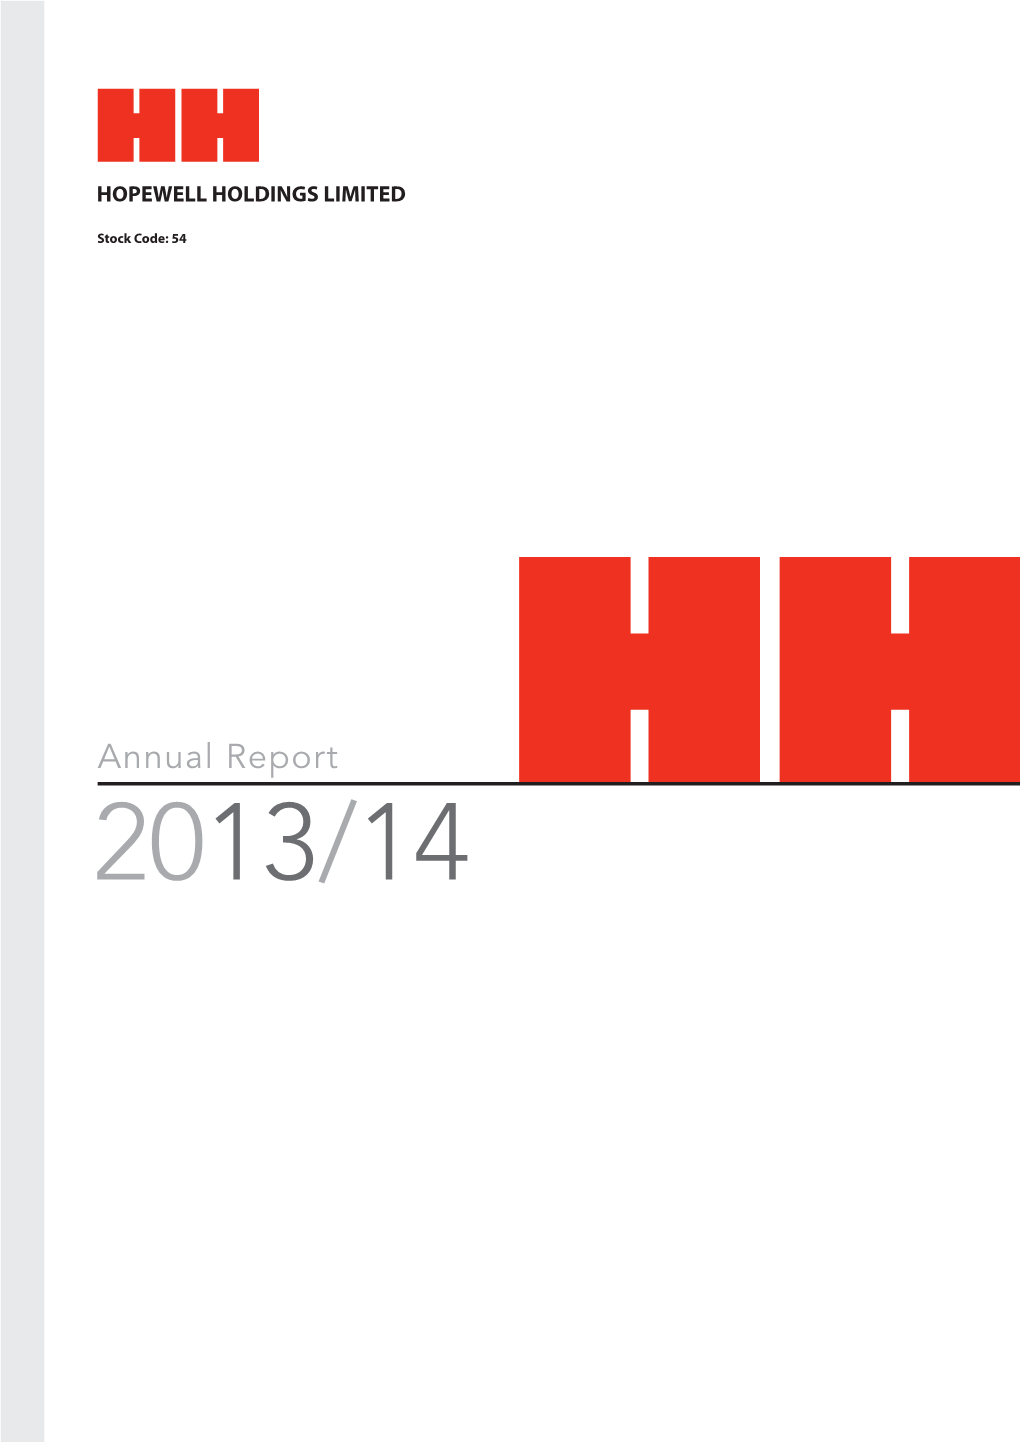 Annual Report 2013/14 5-Year Financial Summary